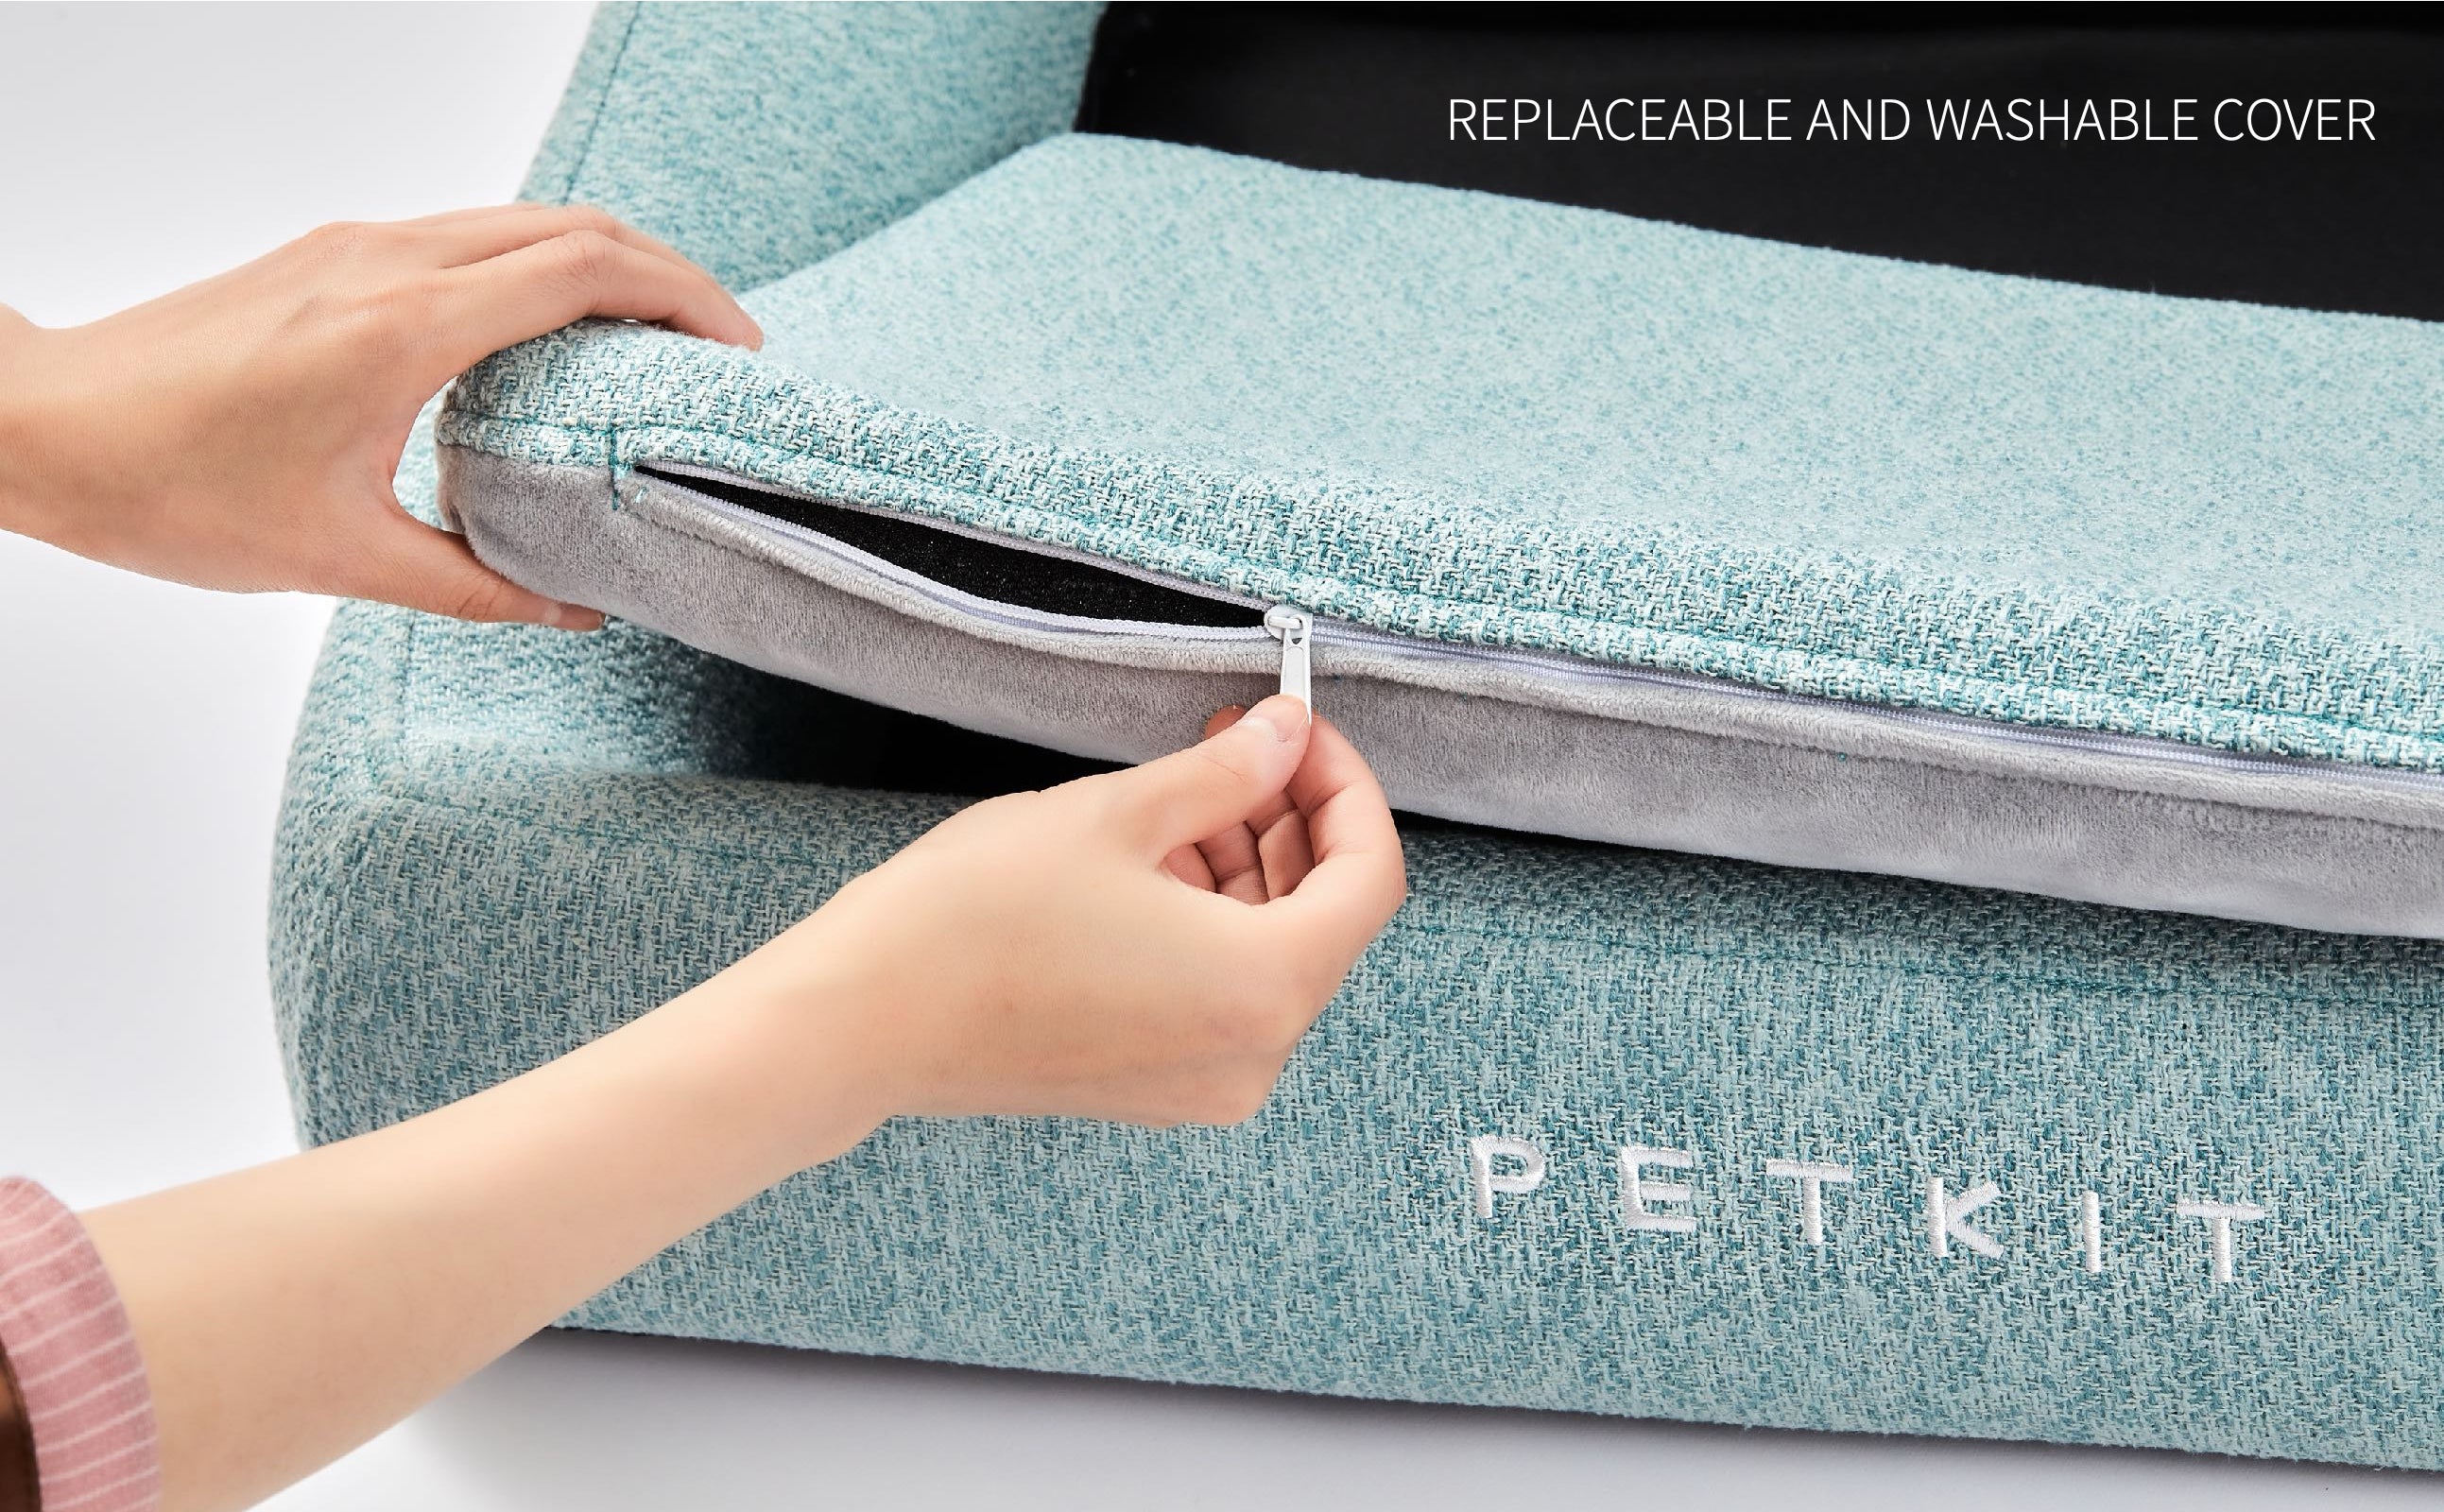 PETKIT Deep Sleep All Season Beds For Pet - Replaceable and Washable Cover